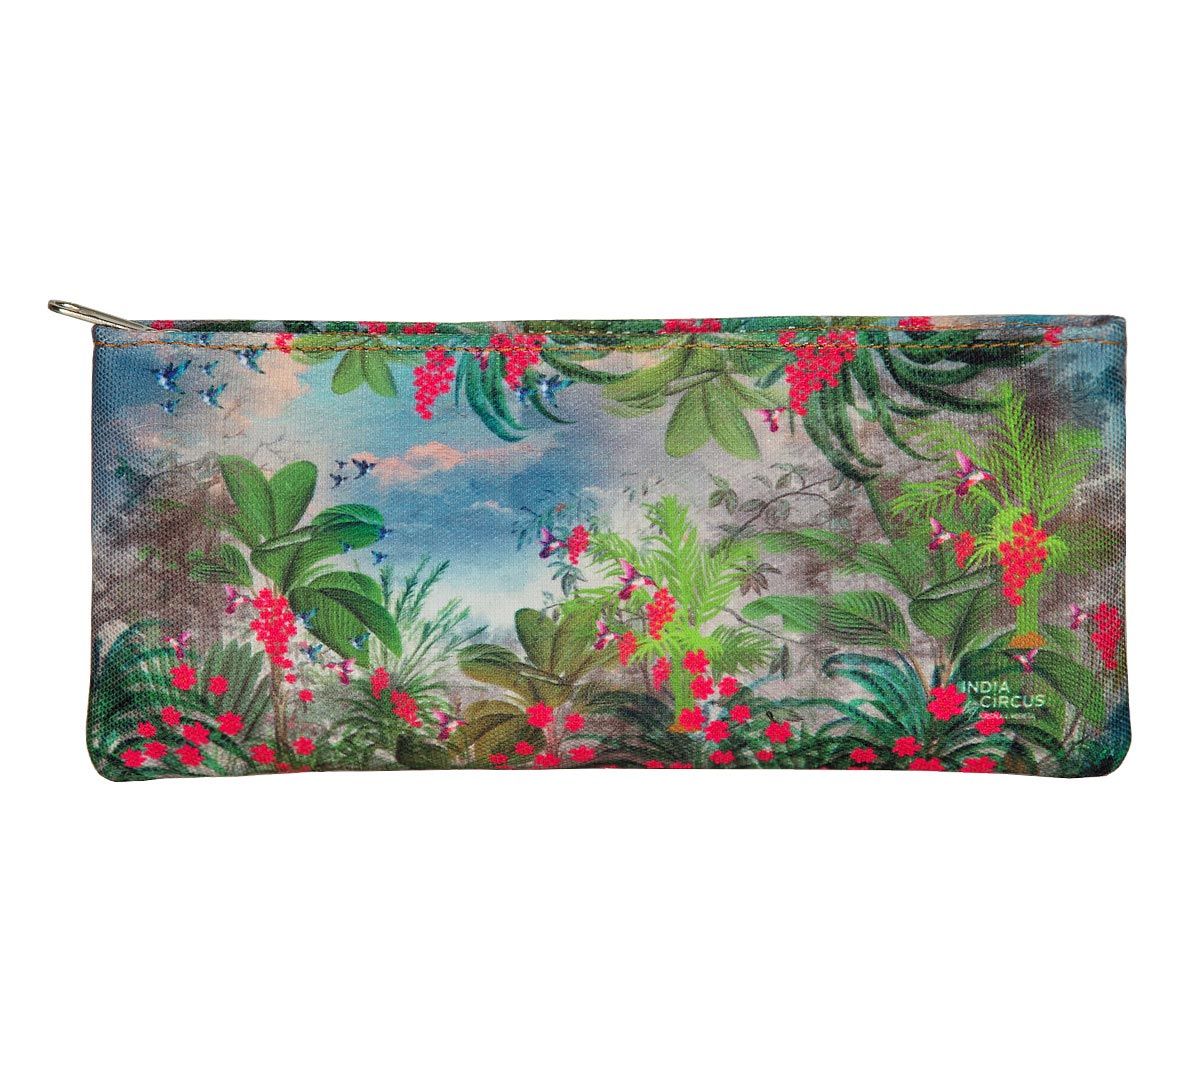 India Circus Tropical View Small Utility Pouch